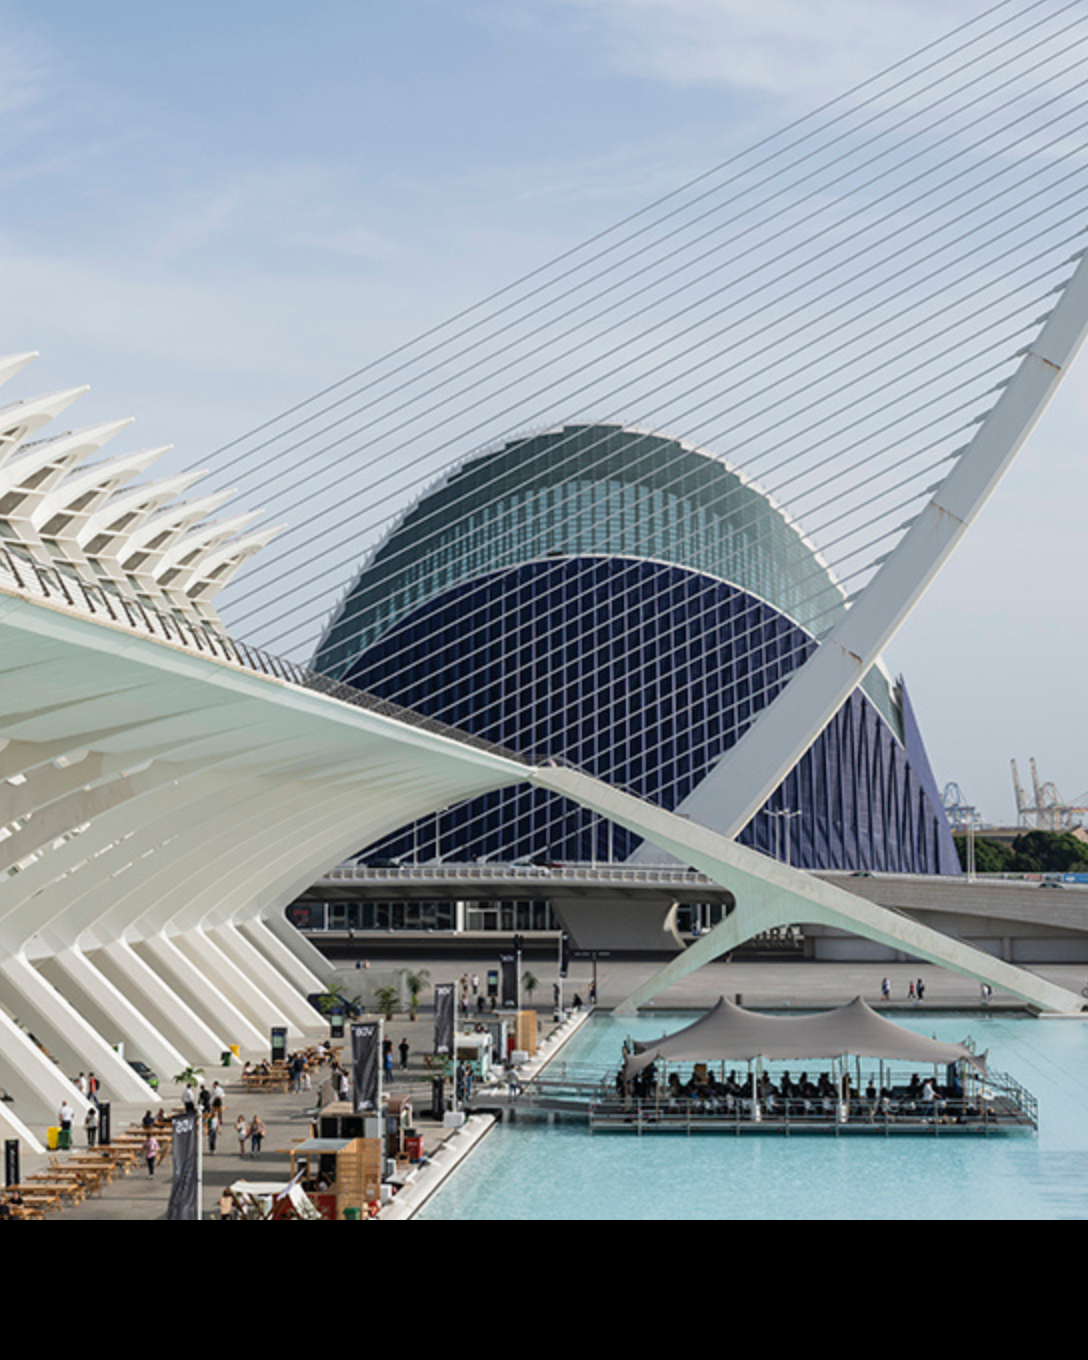 How to get to Valencia Digital Summit